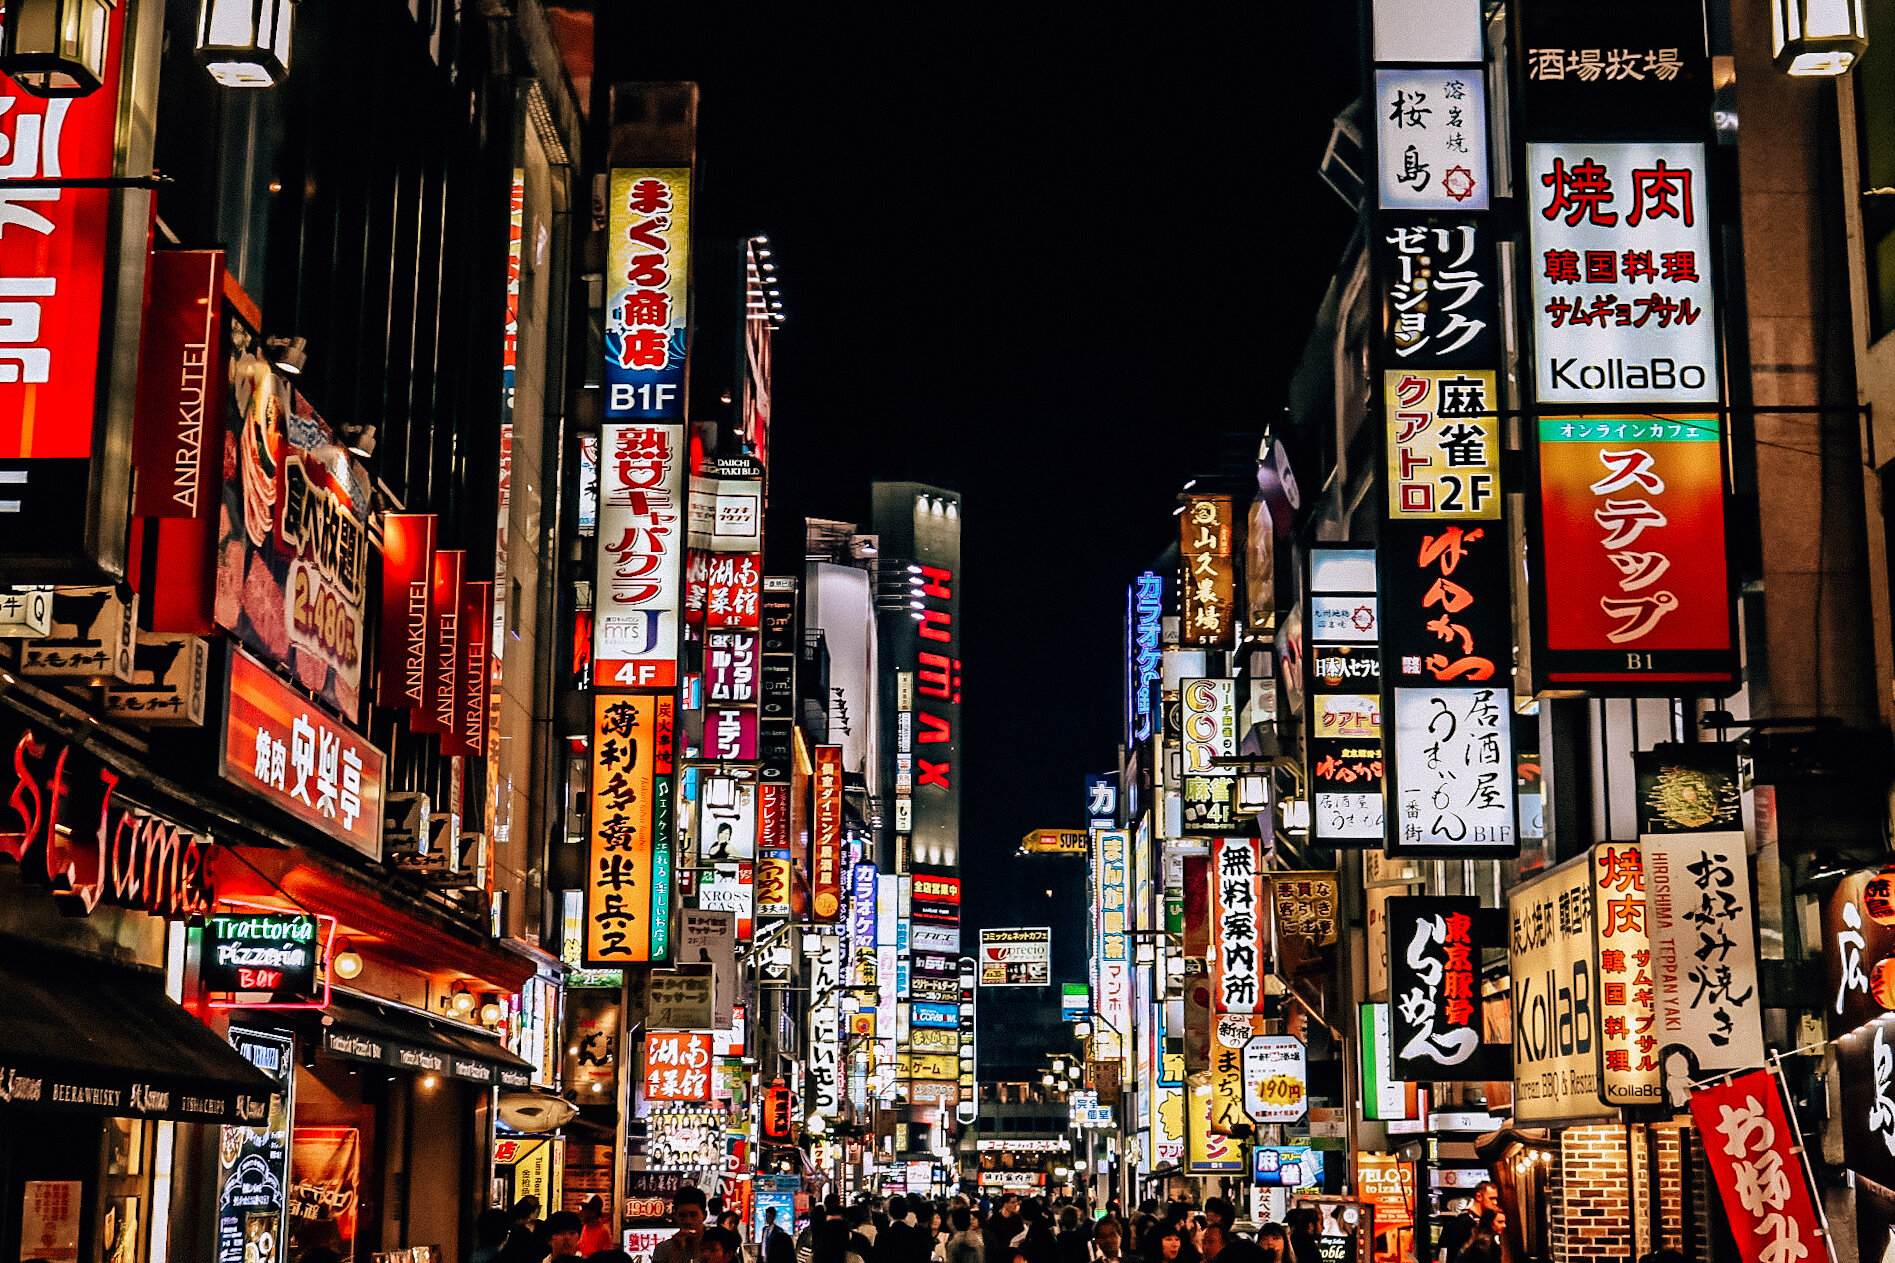 Many bright signs on shops lining a busy Japanese street at night